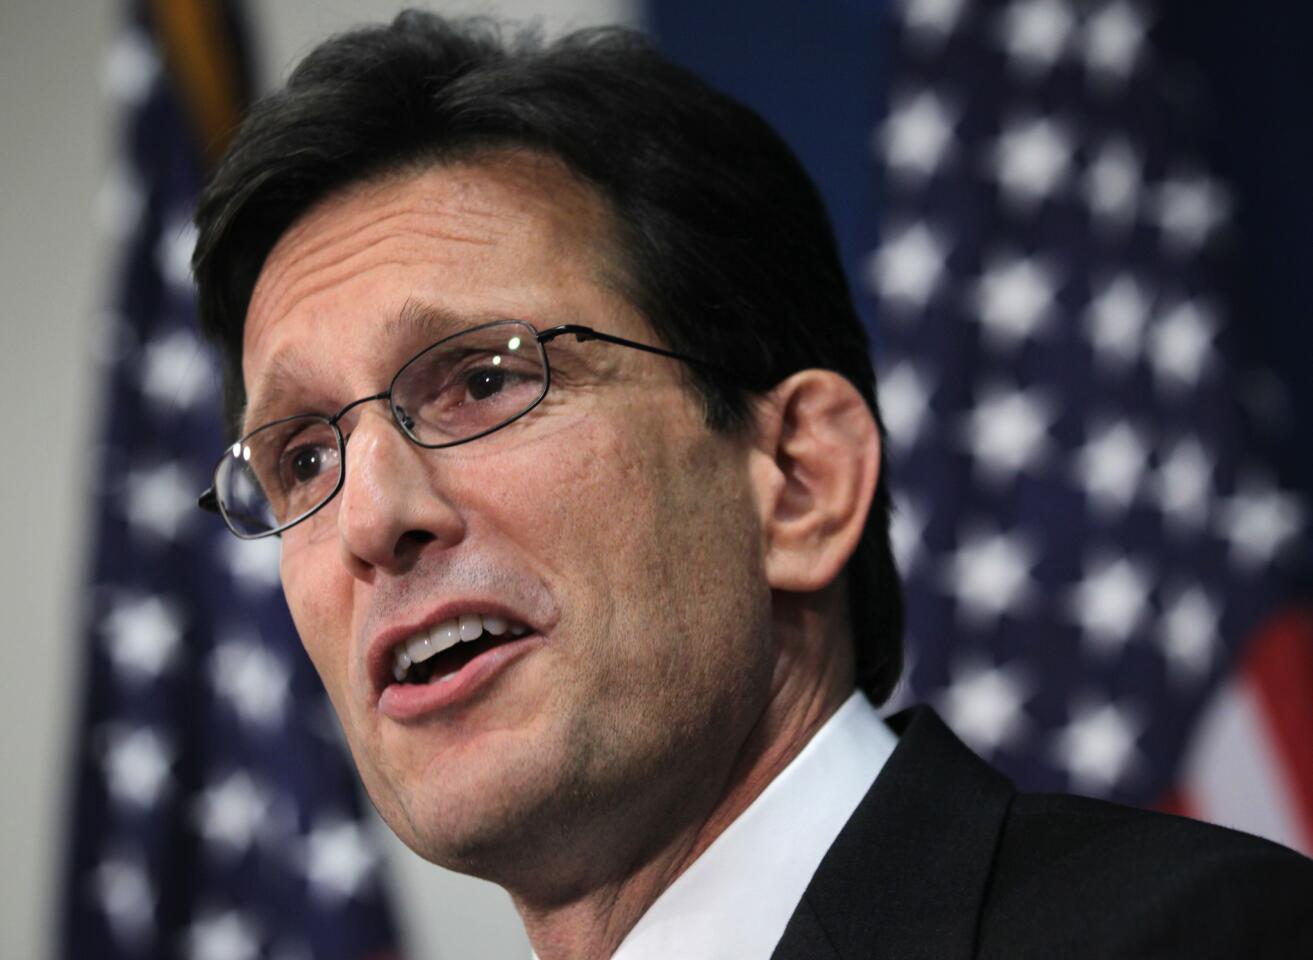 Eric Cantor is defeated